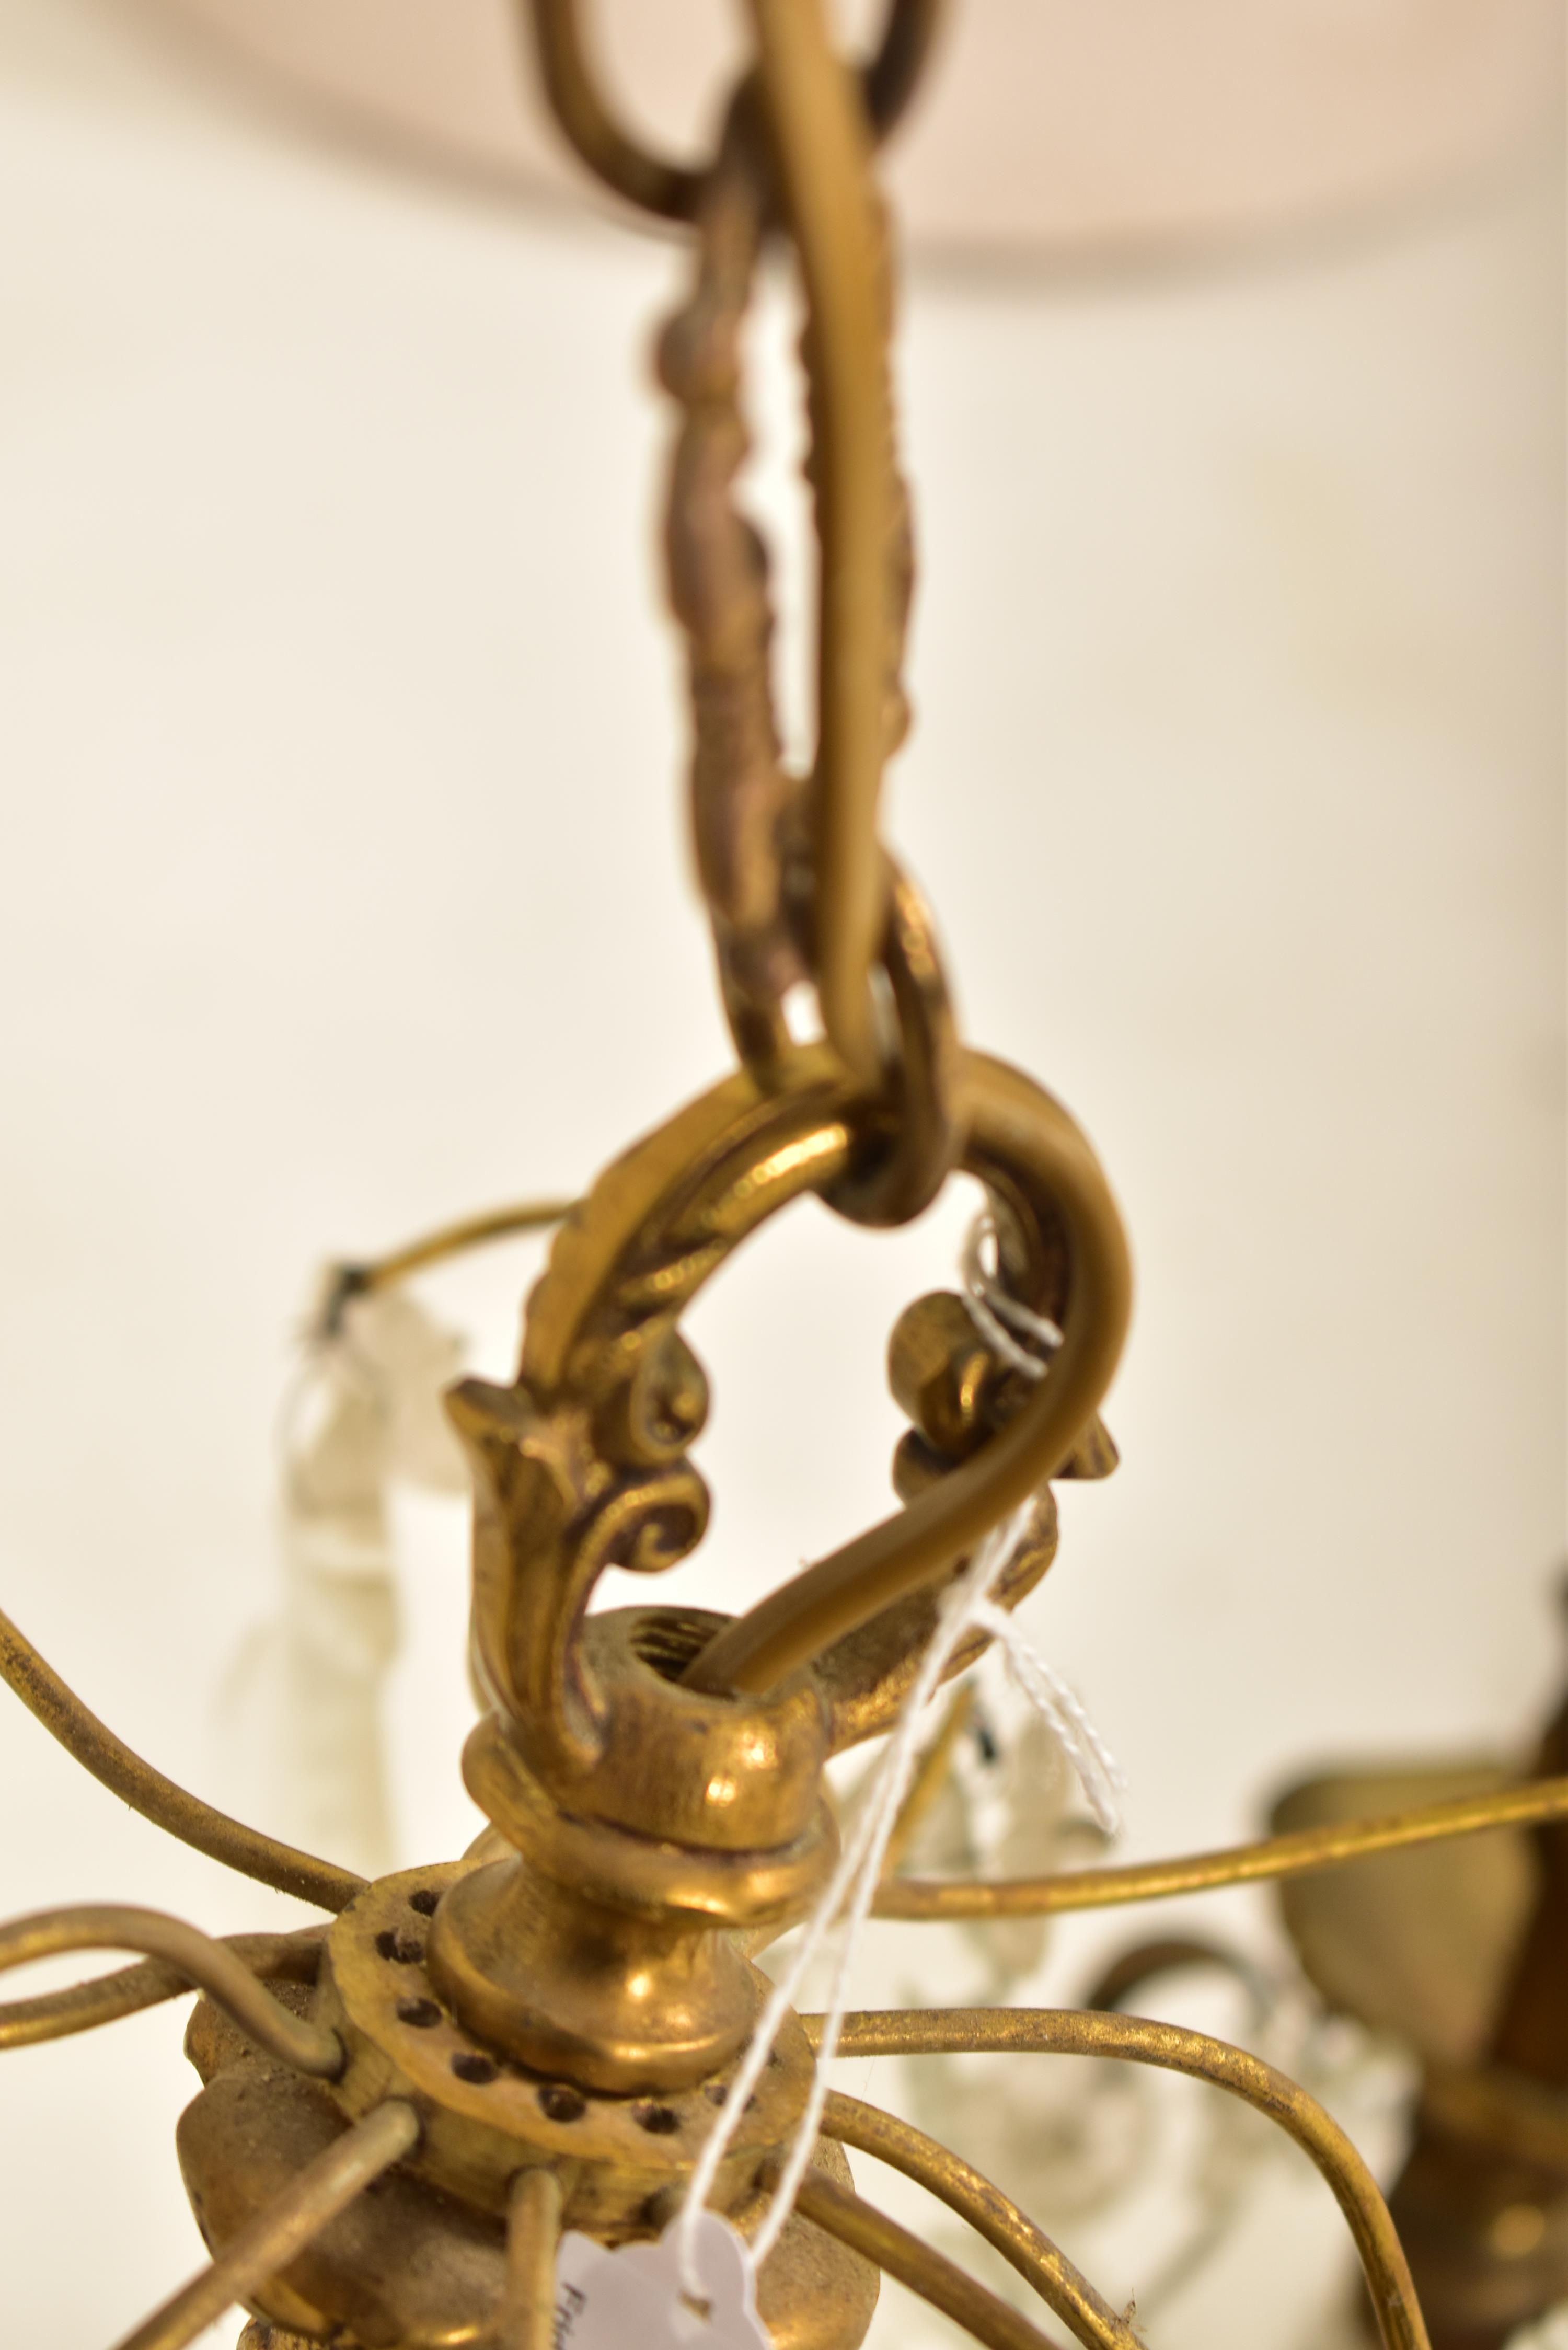 CONTINENTAL INSPIRED 1920S STYLE GILT BRASS SIX ARM CHANDELIER - Image 7 of 7